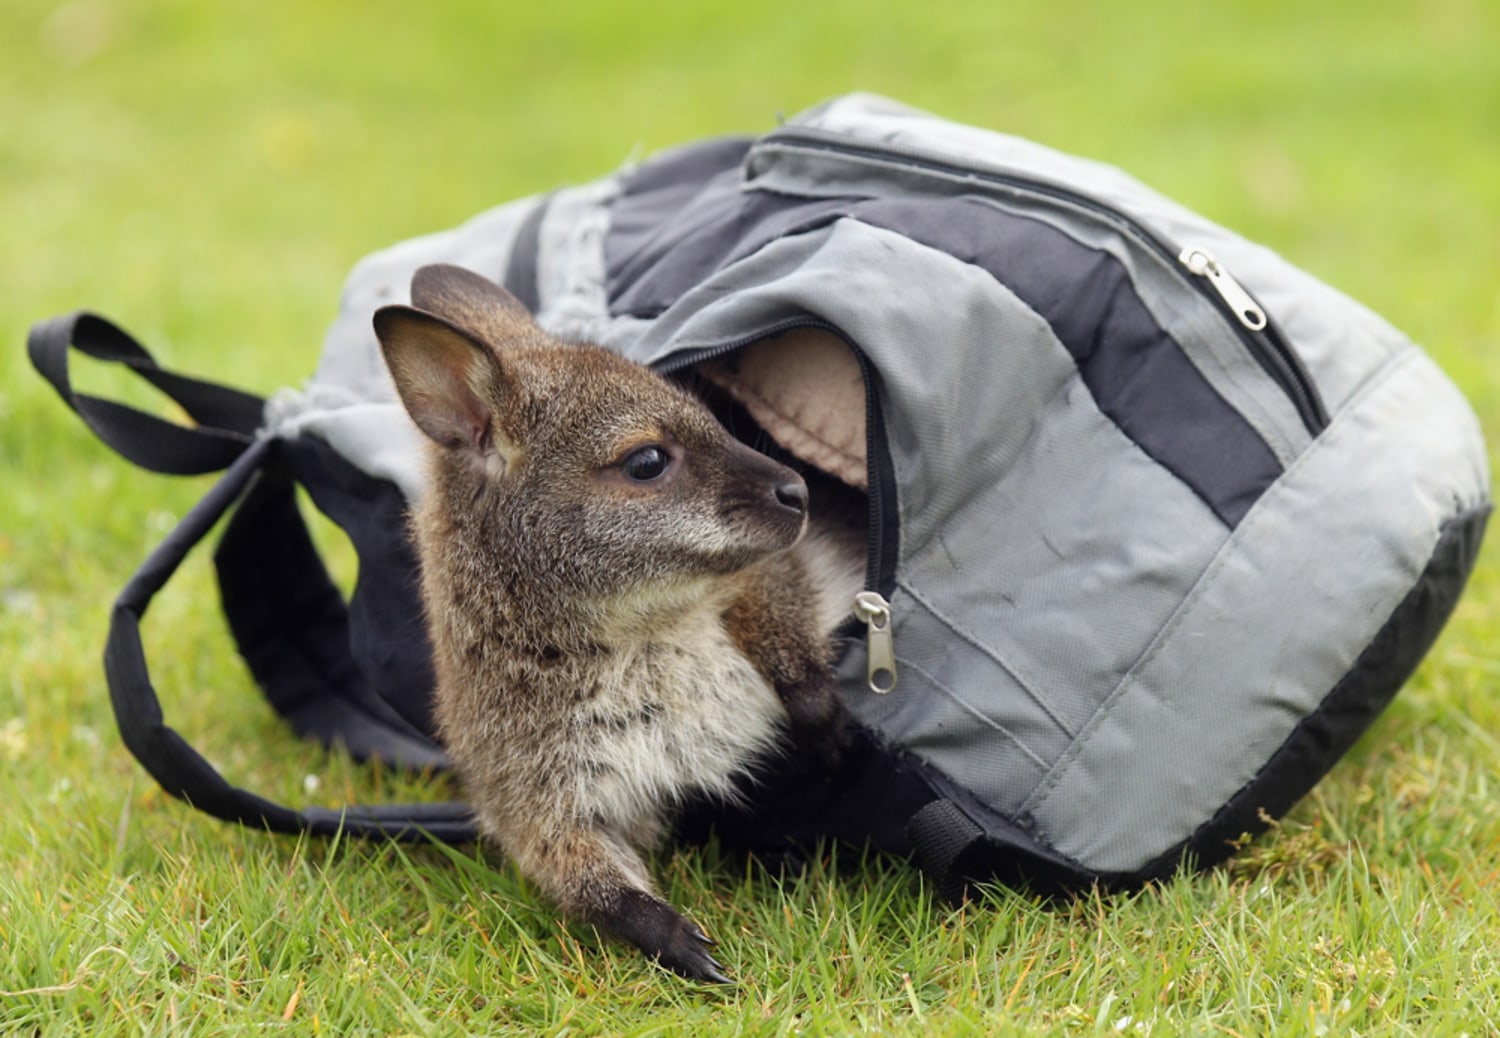 Orphaned baby wallaby lives in a rucksack